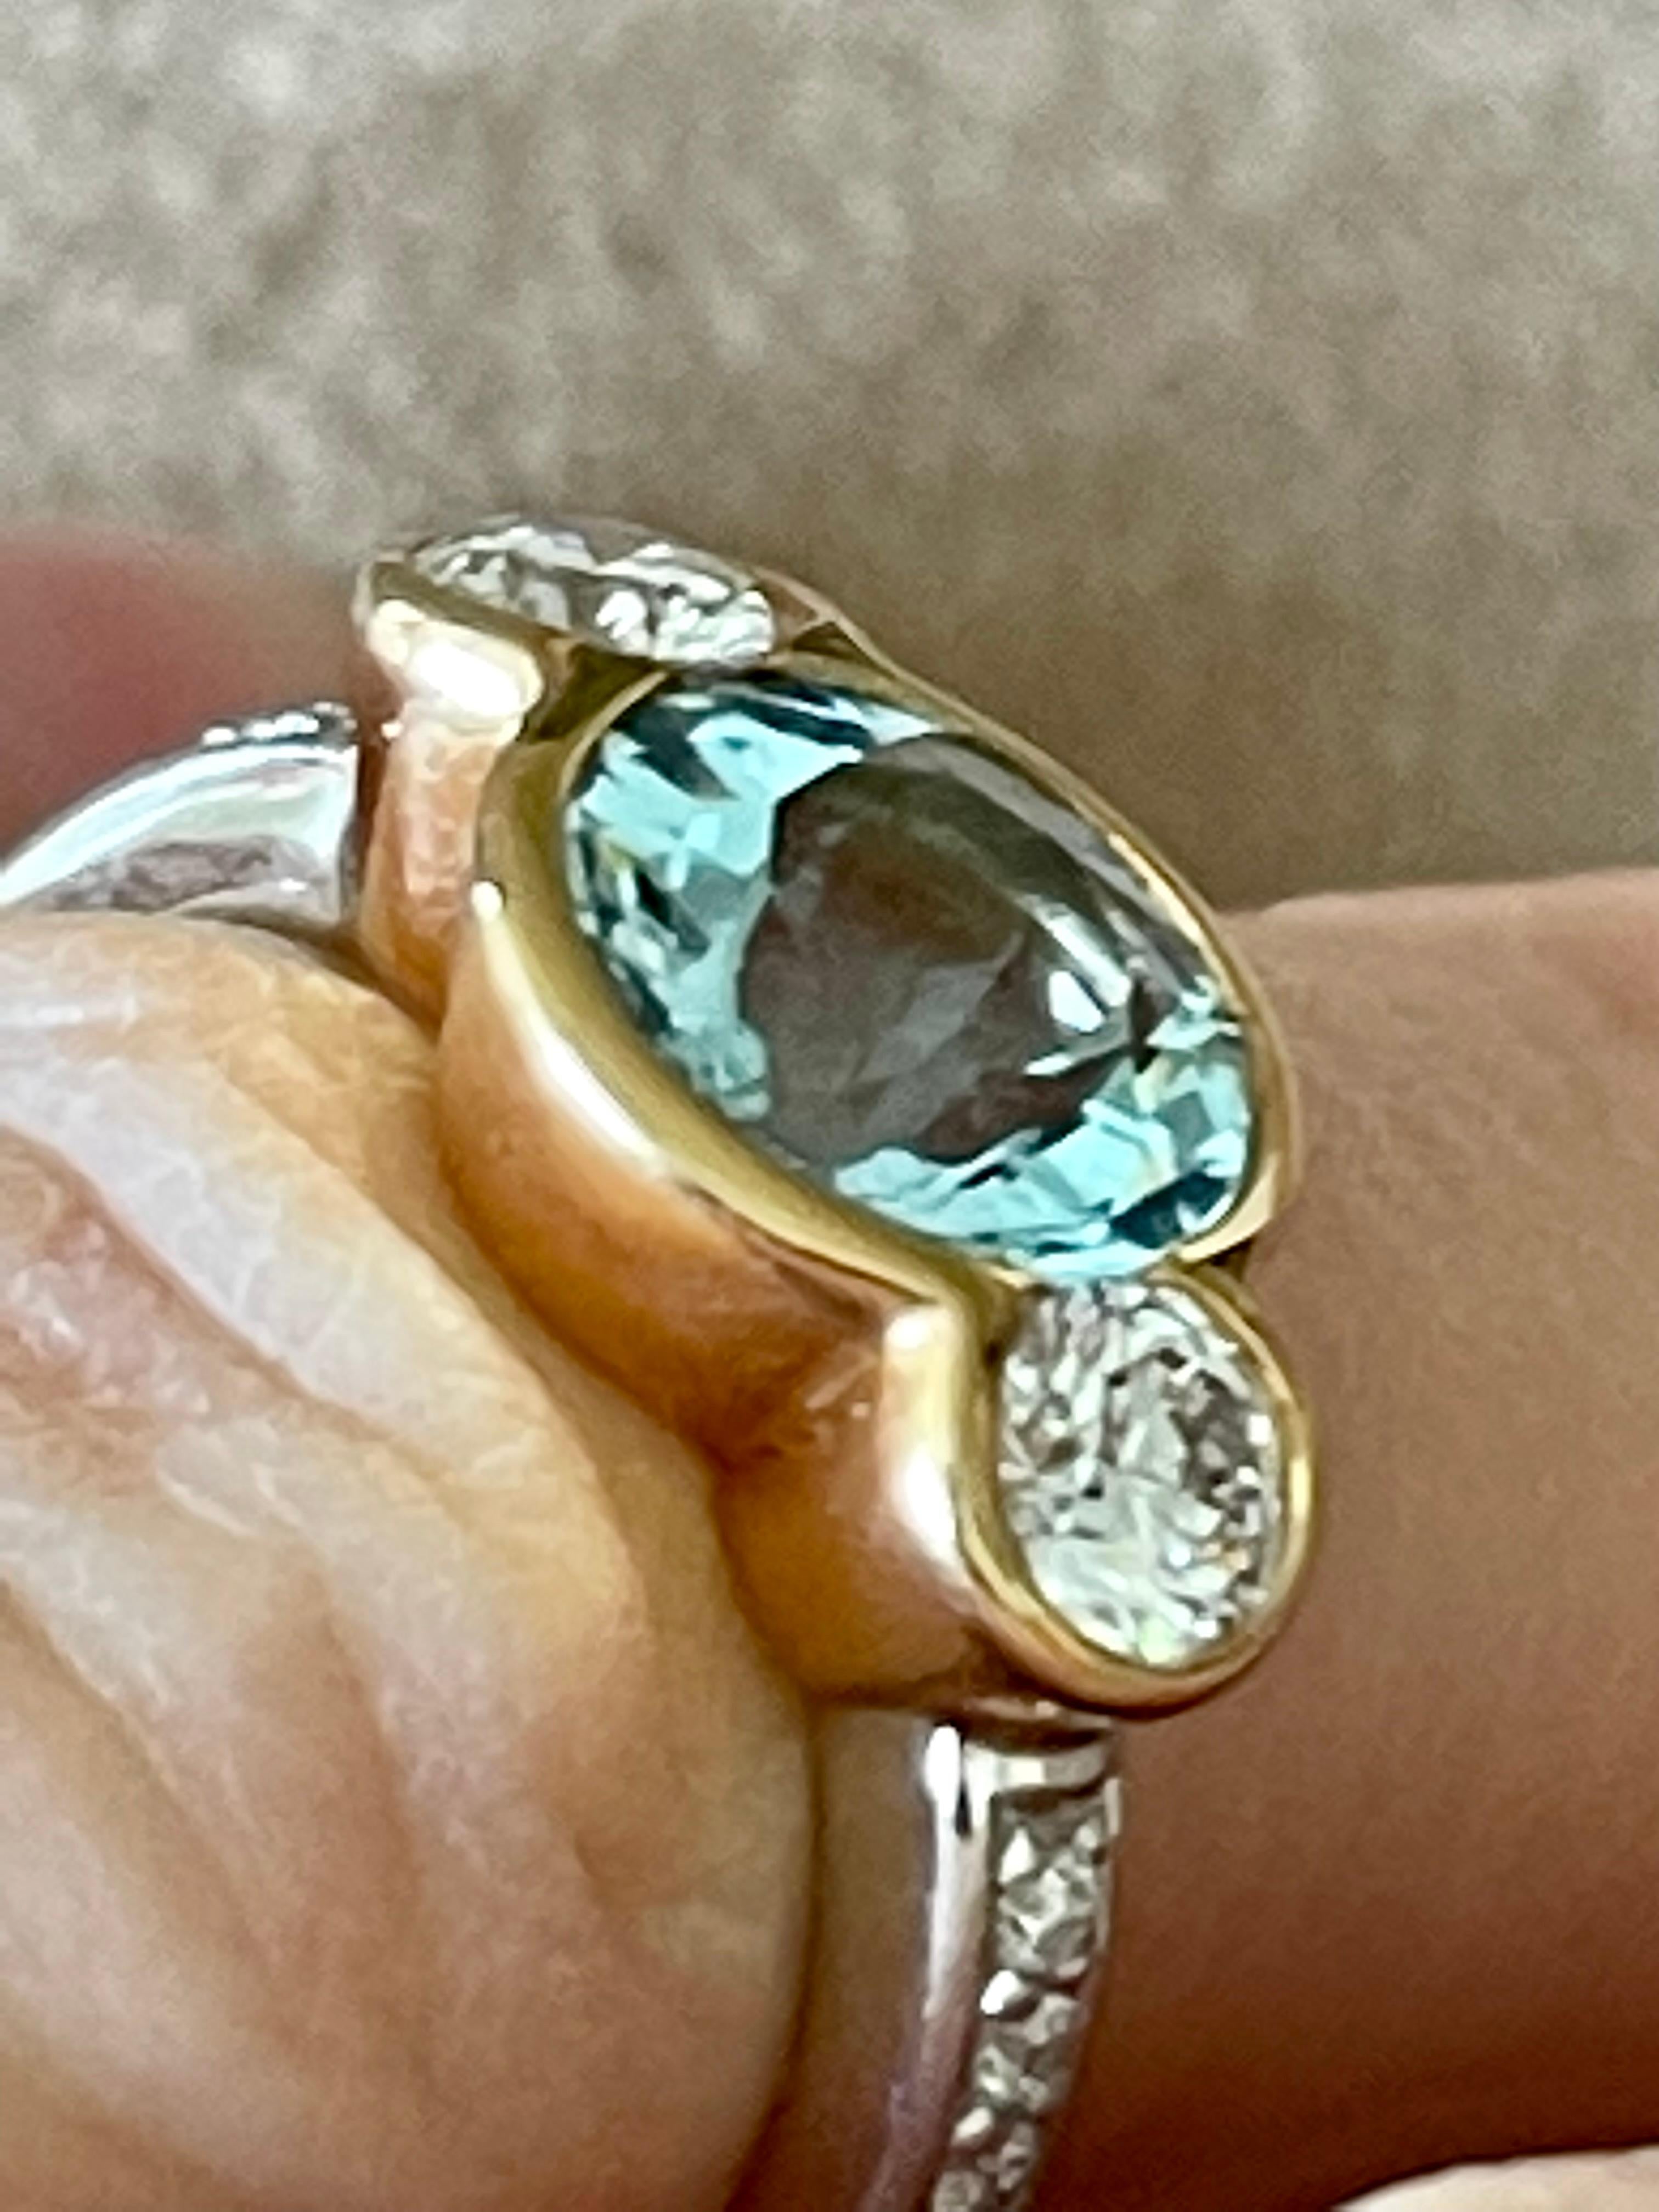 A timeless 18 K white Gold and rose Gold three Stone Ring featuring a bezel set Aquamarine wewighing approximately 2.50 ct. The centre stone is flanked by 2 bezel set brilliant cut Diamonds weighing 0.84 ct, G color, vs clarity.
The ring size is